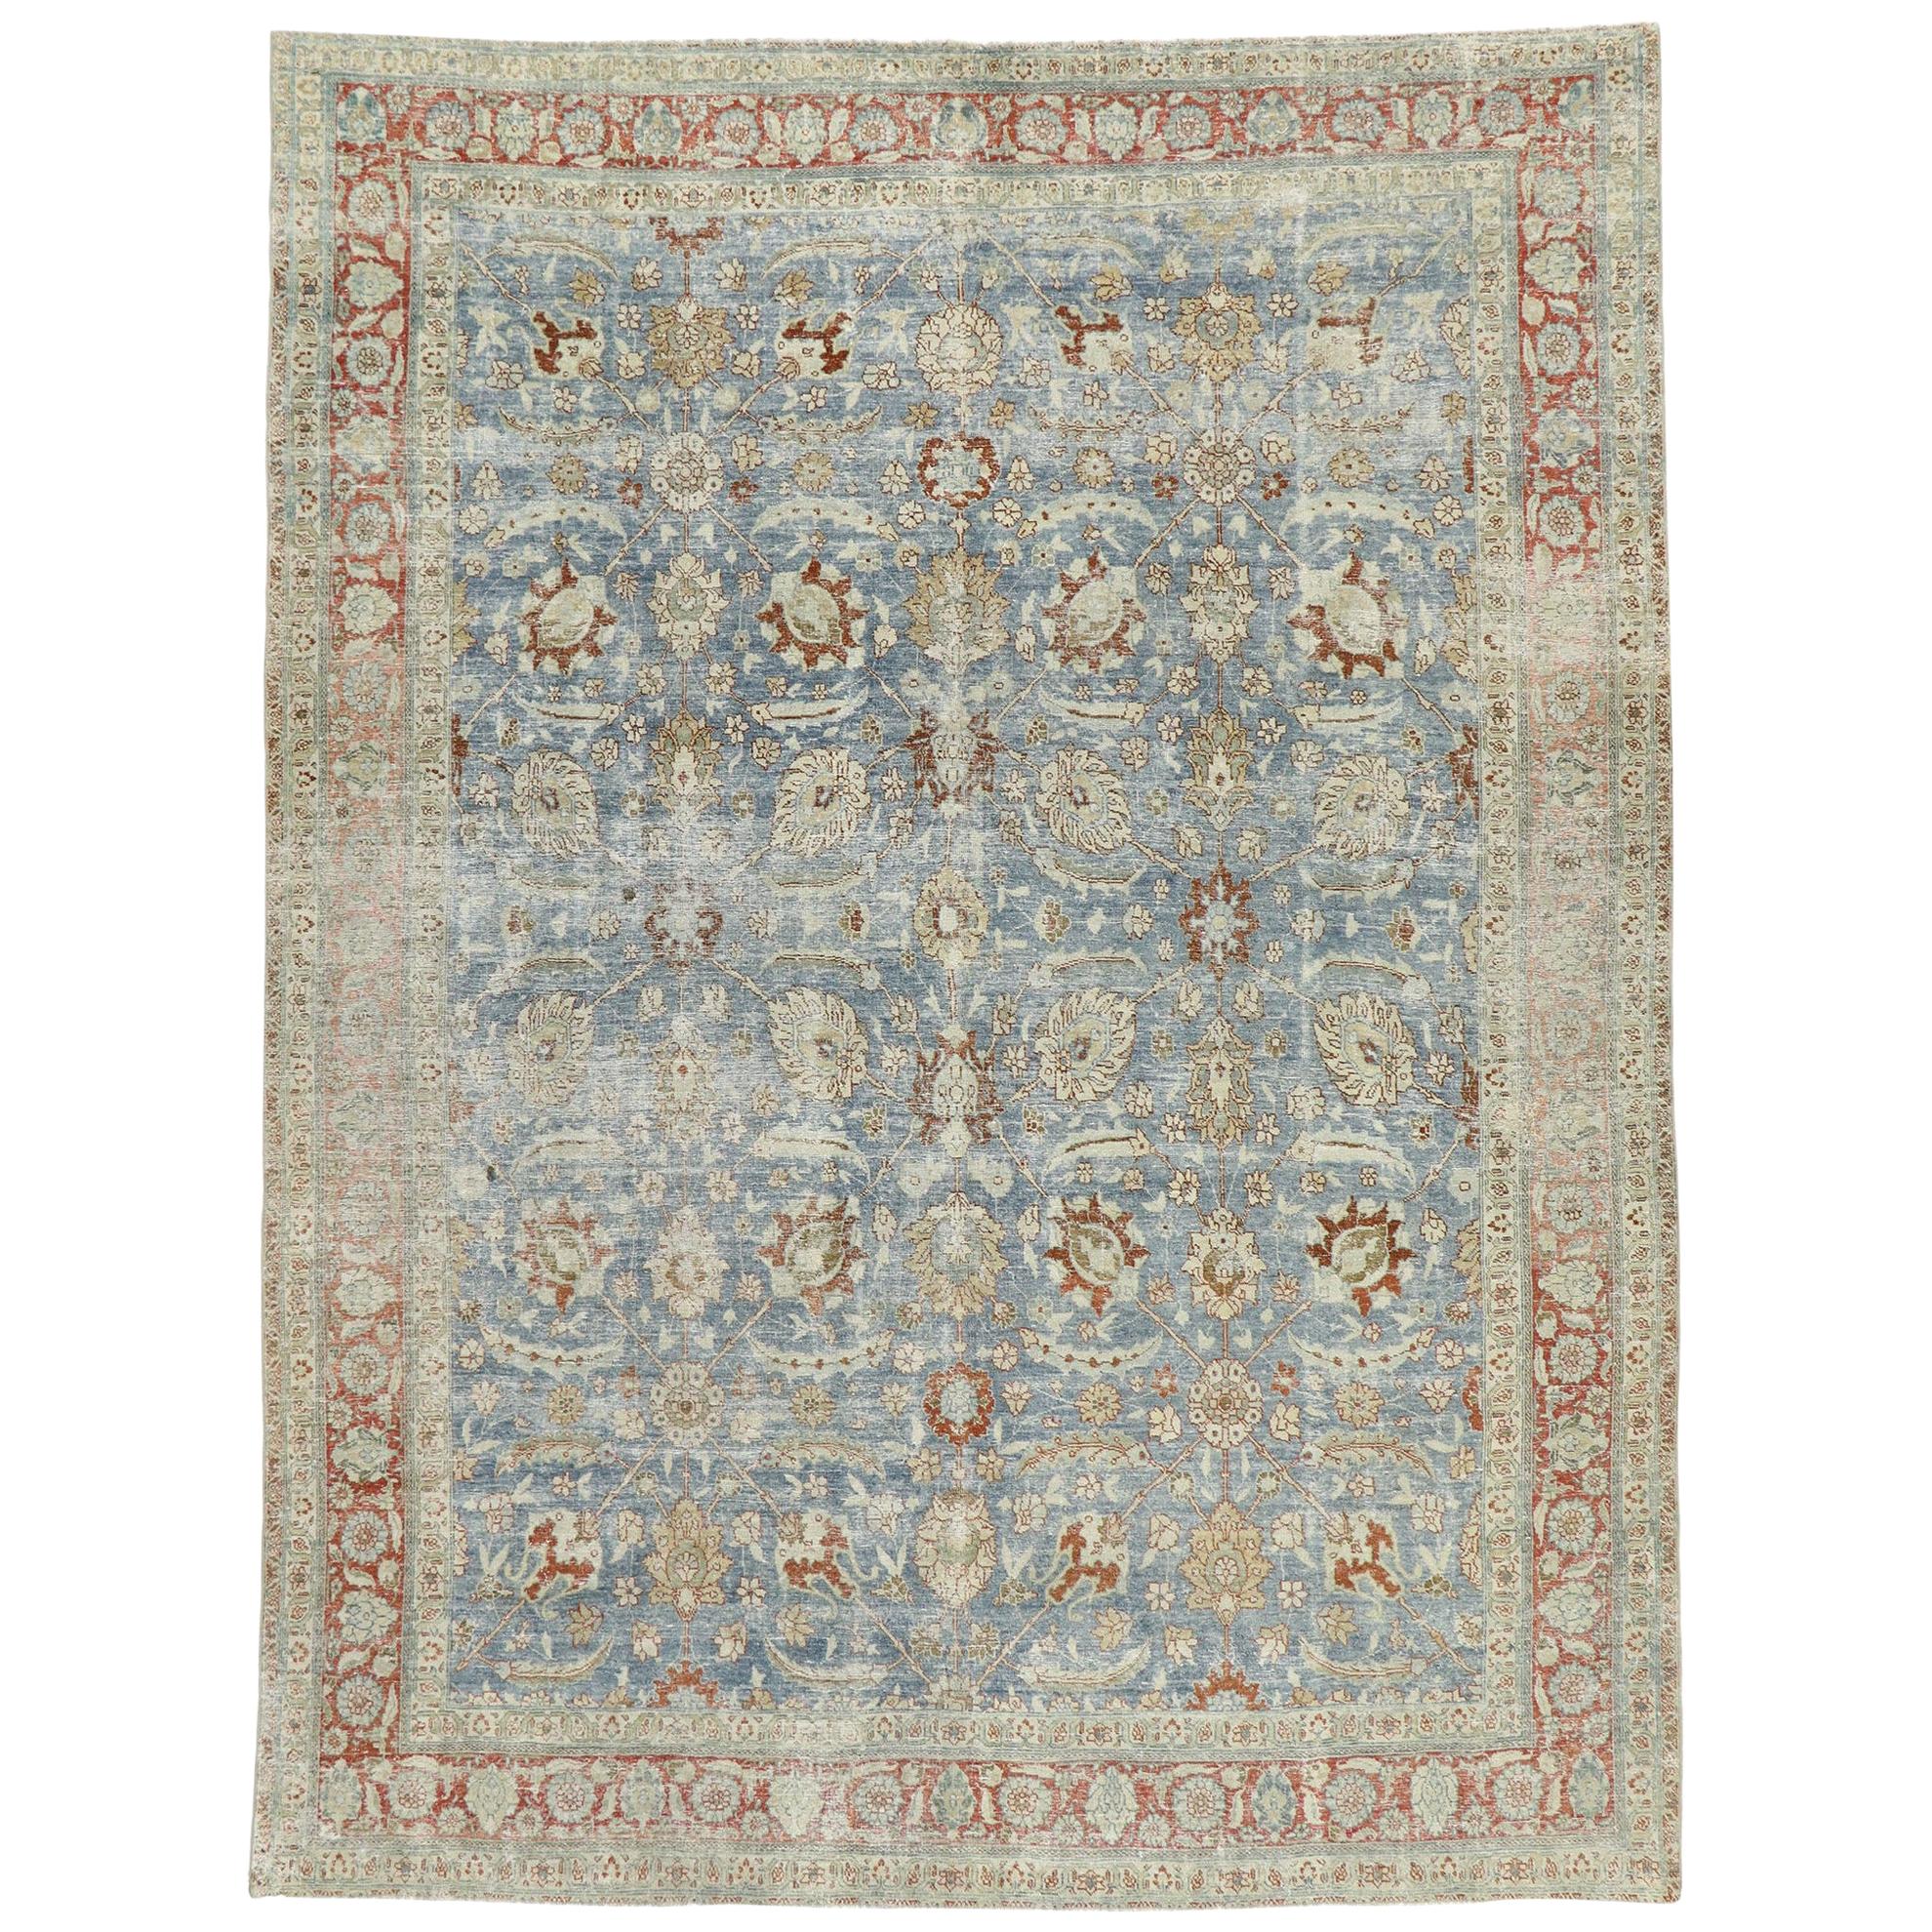 Distressed Antique Persian Tabriz Rug with Modern Rustic Style